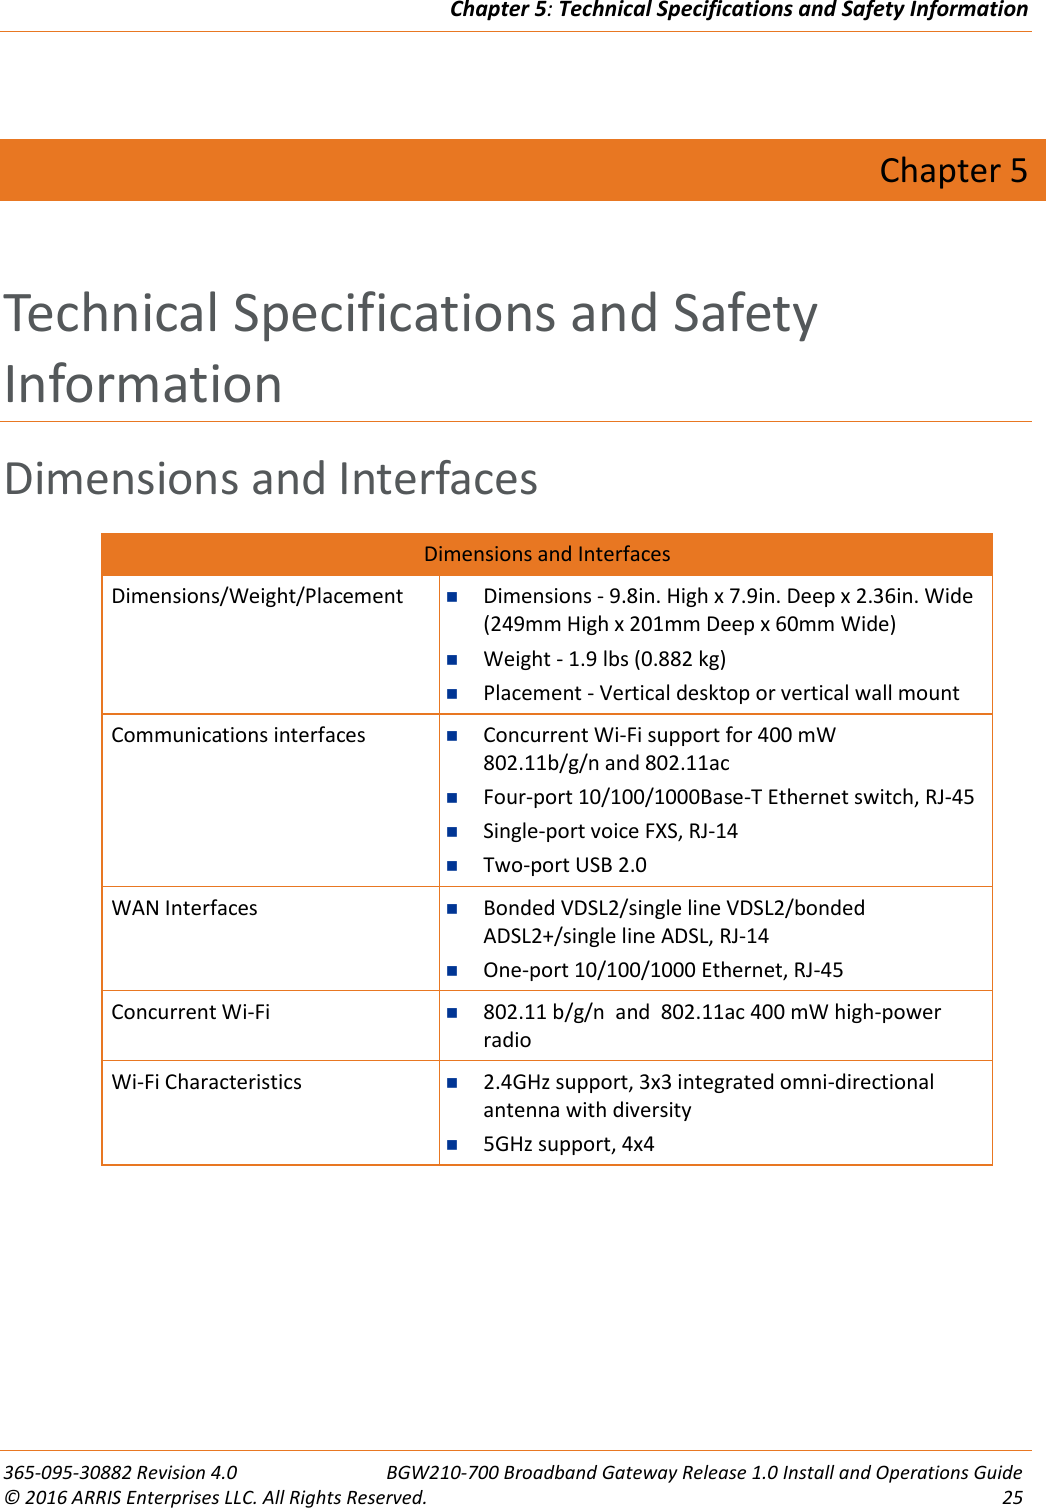 Chapter 5: Technical Specifications and Safety Information  365-095-30882 Revision 4.0  BGW210-700 Broadband Gateway Release 1.0 Install and Operations Guide © 2016 ARRIS Enterprises LLC. All Rights Reserved.  25   Chapter 5 Technical Specifications and Safety Information Dimensions and Interfaces Dimensions and Interfaces Dimensions/Weight/Placement  Dimensions - 9.8in. High x 7.9in. Deep x 2.36in. Wide (249mm High x 201mm Deep x 60mm Wide)   Weight - 1.9 lbs (0.882 kg)  Placement - Vertical desktop or vertical wall mount Communications interfaces  Concurrent Wi-Fi support for 400 mW  802.11b/g/n and 802.11ac  Four-port 10/100/1000Base-T Ethernet switch, RJ-45  Single-port voice FXS, RJ-14  Two-port USB 2.0 WAN Interfaces  Bonded VDSL2/single line VDSL2/bonded  ADSL2+/single line ADSL, RJ-14  One-port 10/100/1000 Ethernet, RJ-45 Concurrent Wi-Fi  802.11 b/g/n  and  802.11ac 400 mW high-power radio Wi-Fi Characteristics  2.4GHz support, 3x3 integrated omni-directional antenna with diversity  5GHz support, 4x4    